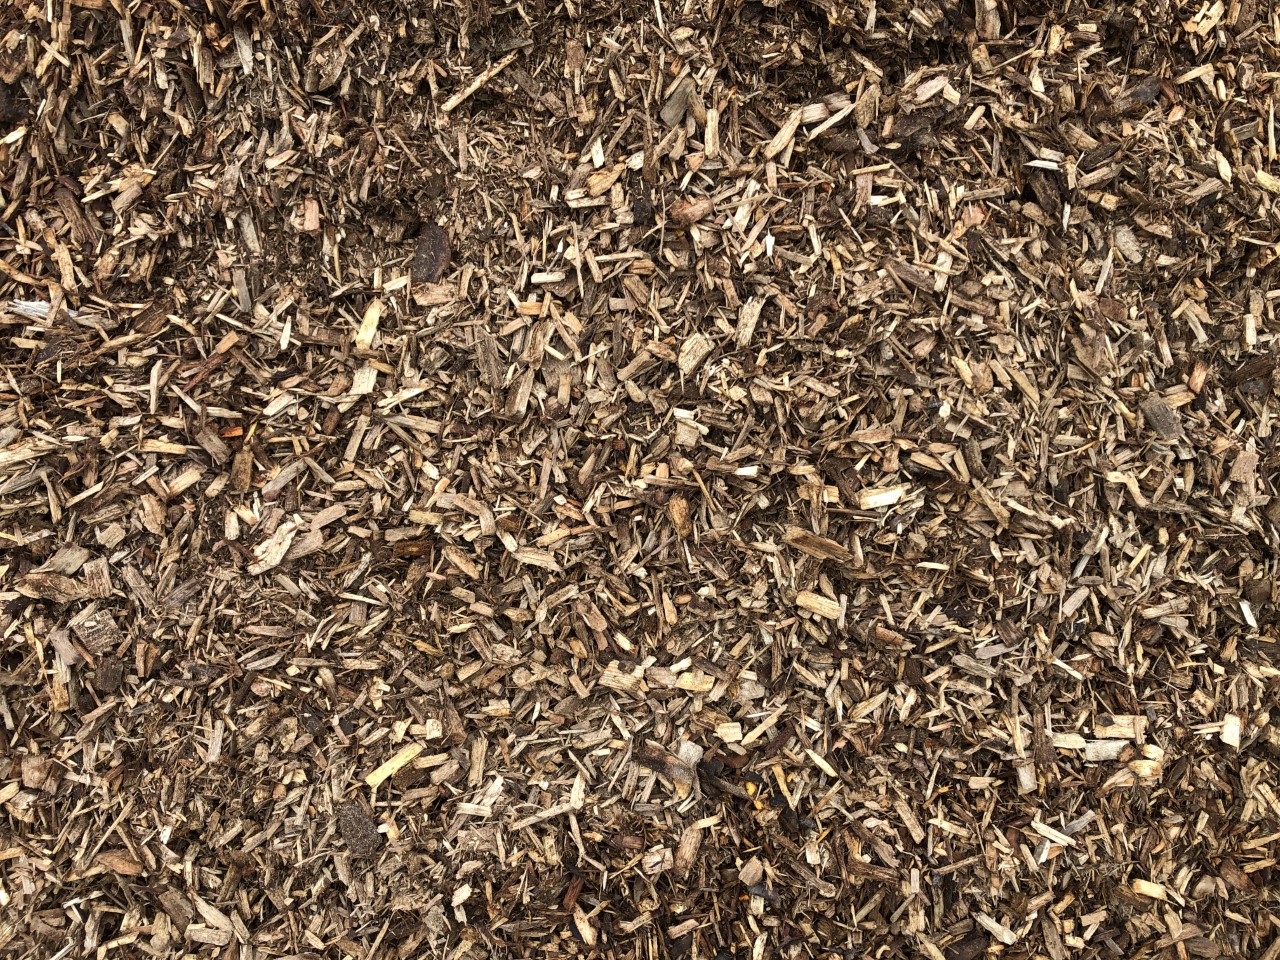 Landyshade Mulch Products 1801 Colebrook Rd, Lancaster, PA ...